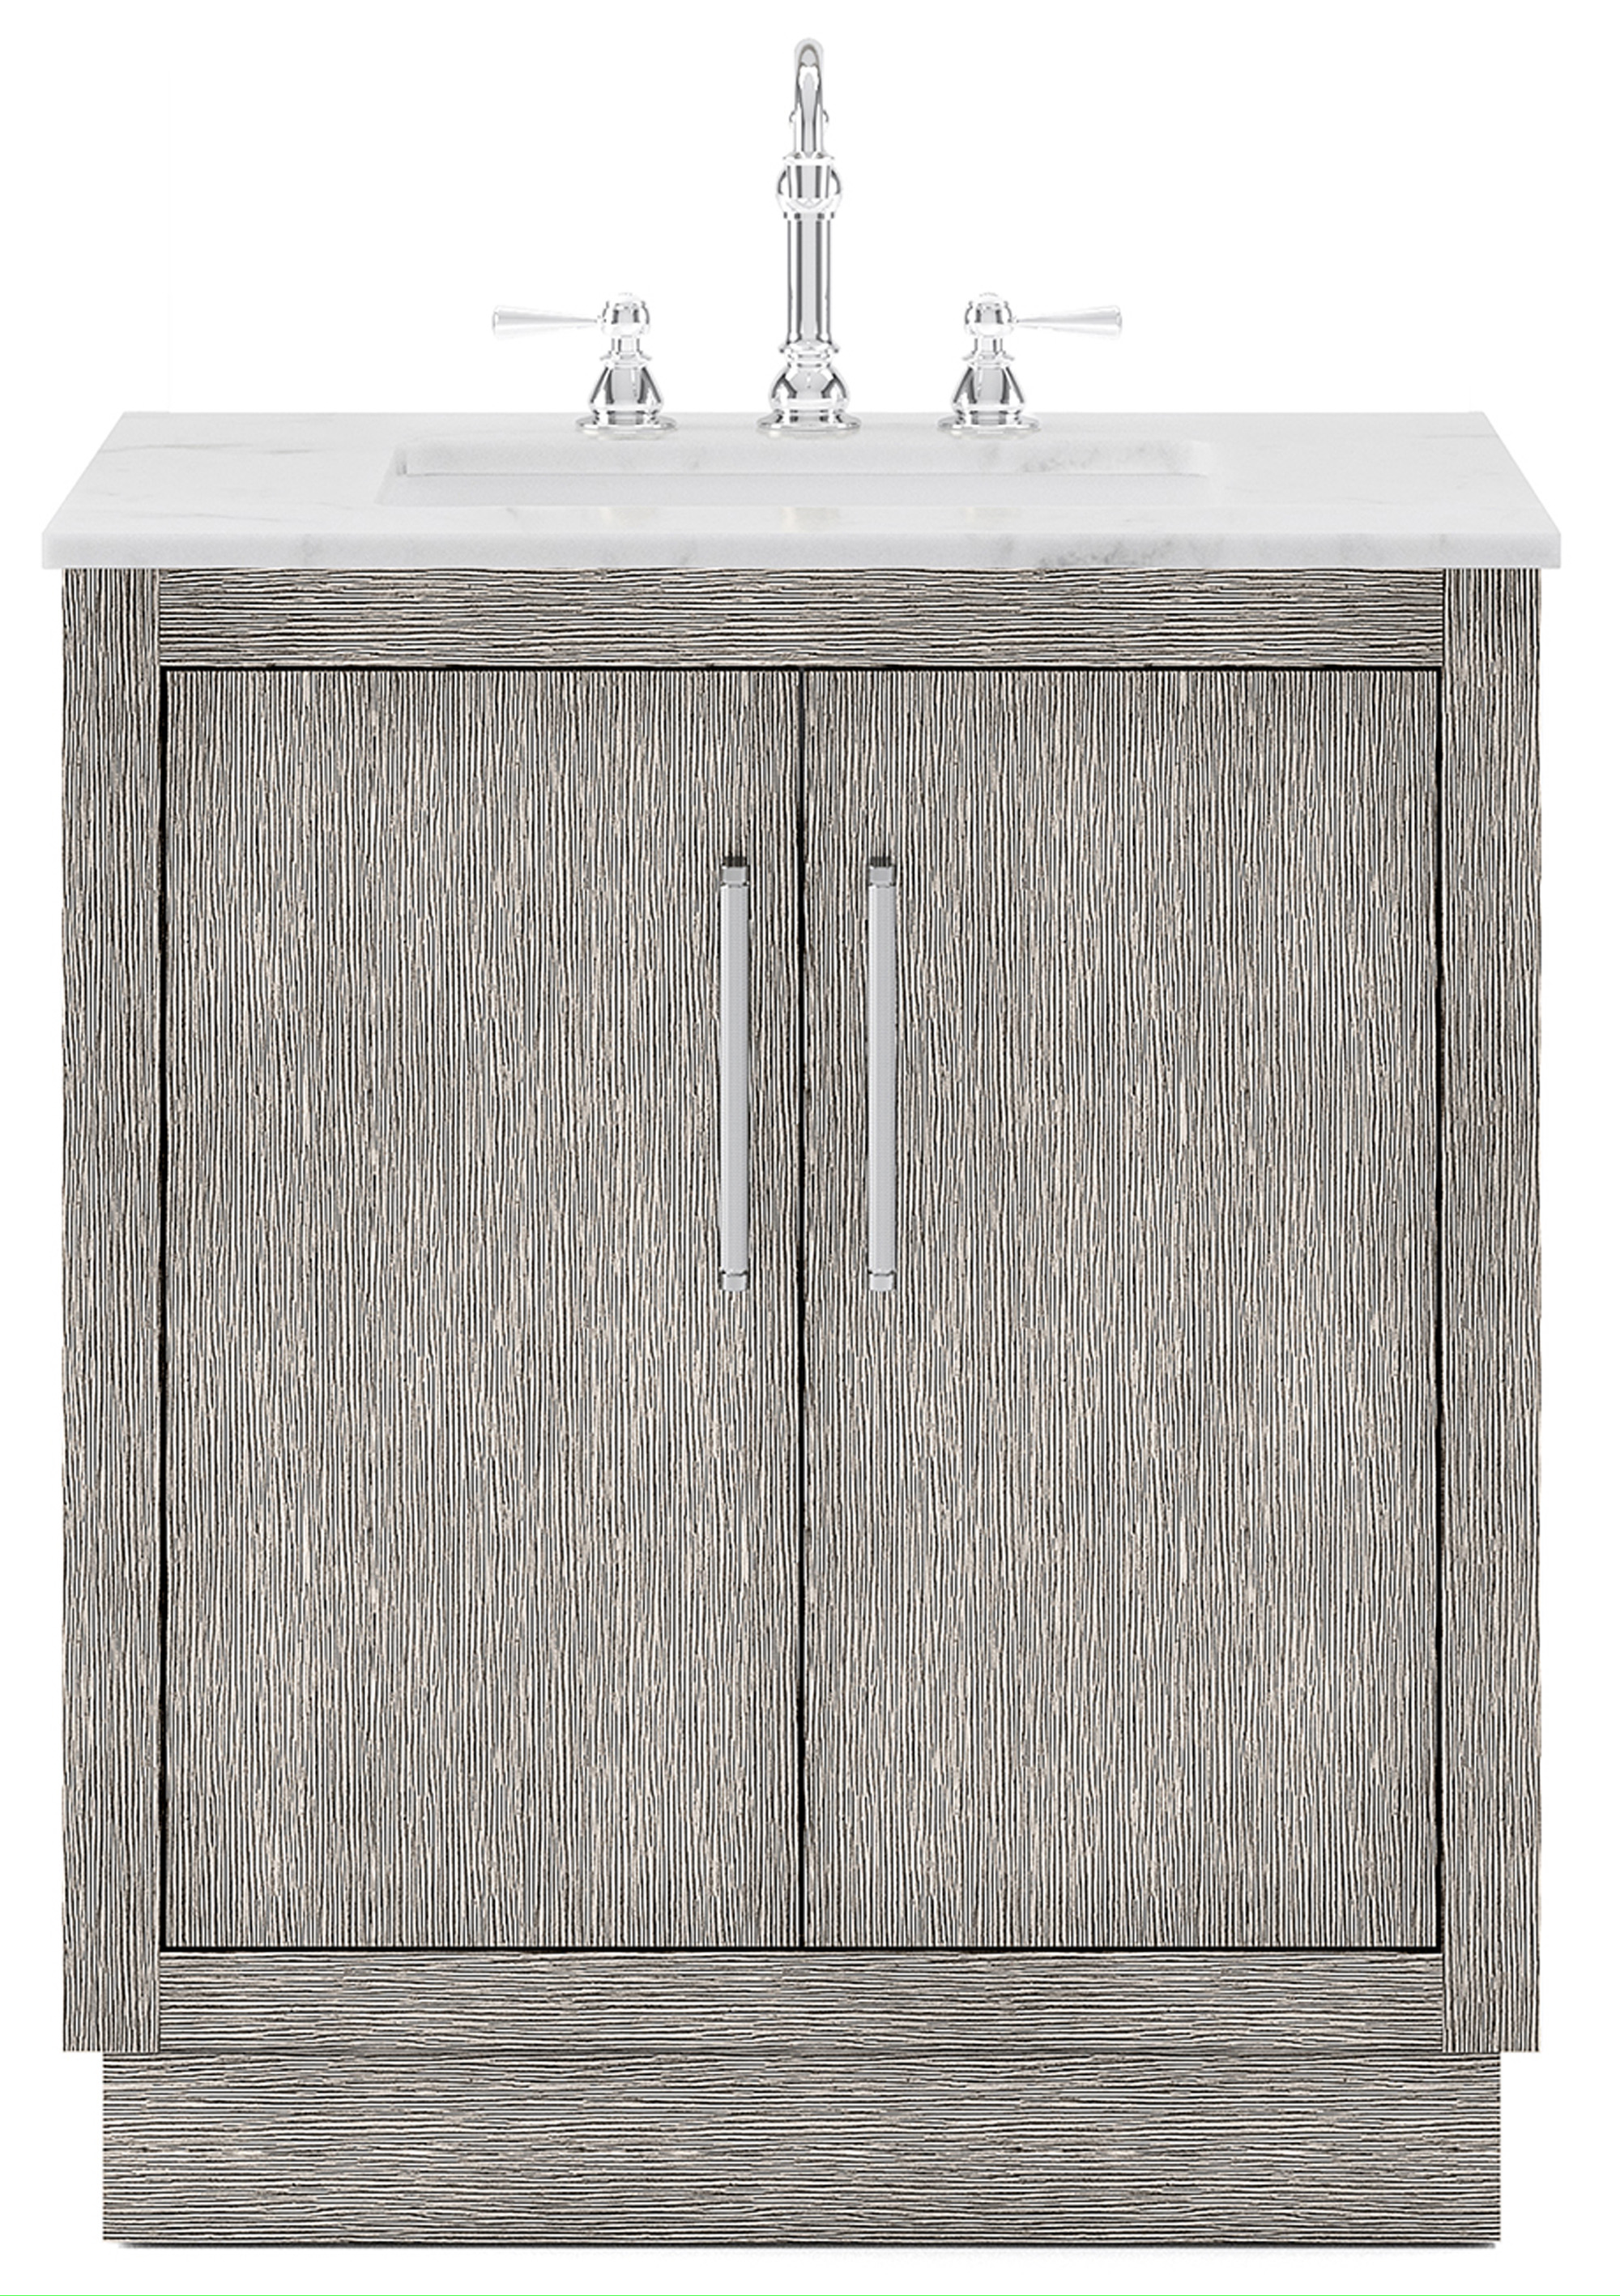 30" Single Sink Carrara White Marble Countertop Vanity in Grey Oak with Mirror and Faucet Options